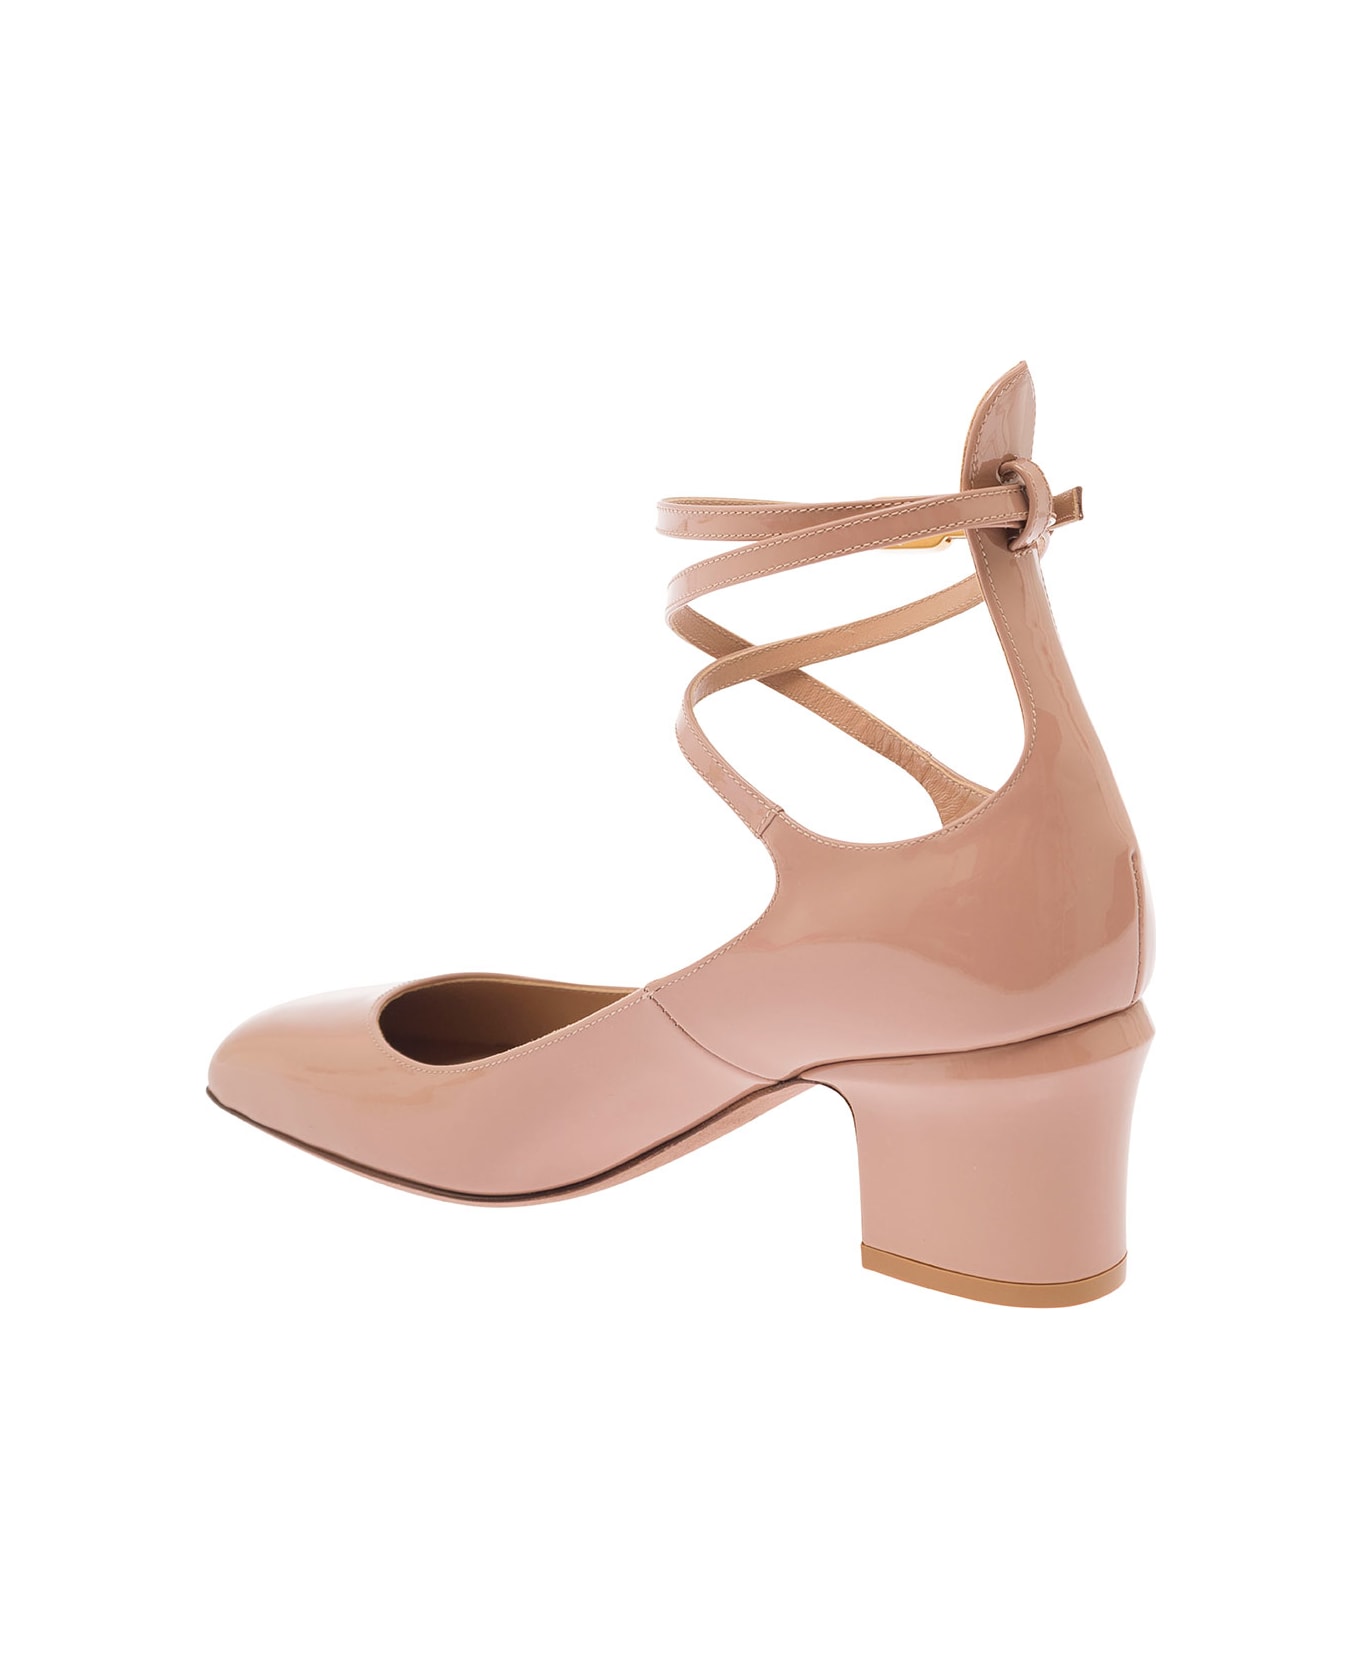 Valentino Garavani 'tan-go' Bege Décolleté With V-logo Buckle In Patent Leather Woman - Beige ハイヒール